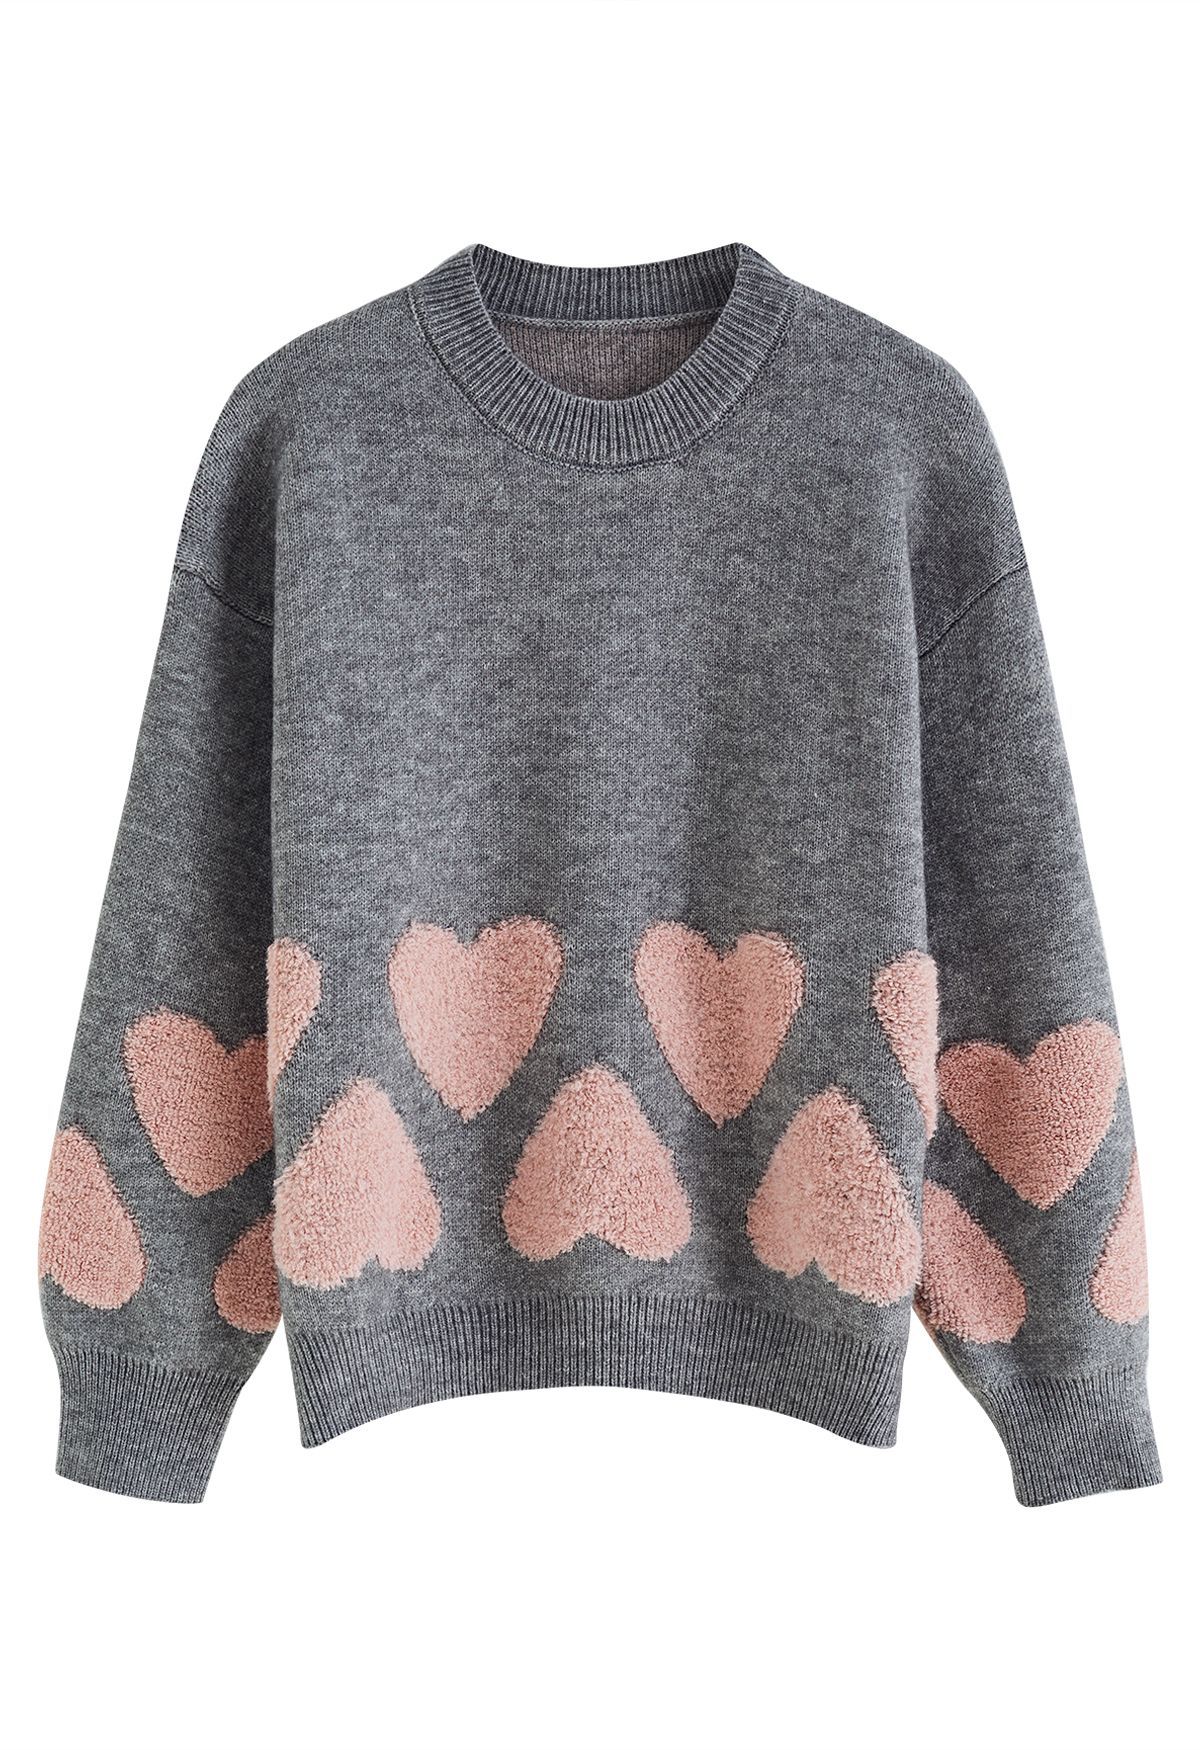 Tender Fuzzy Heart Jacquard Knit Sweater in Grey | Chicwish